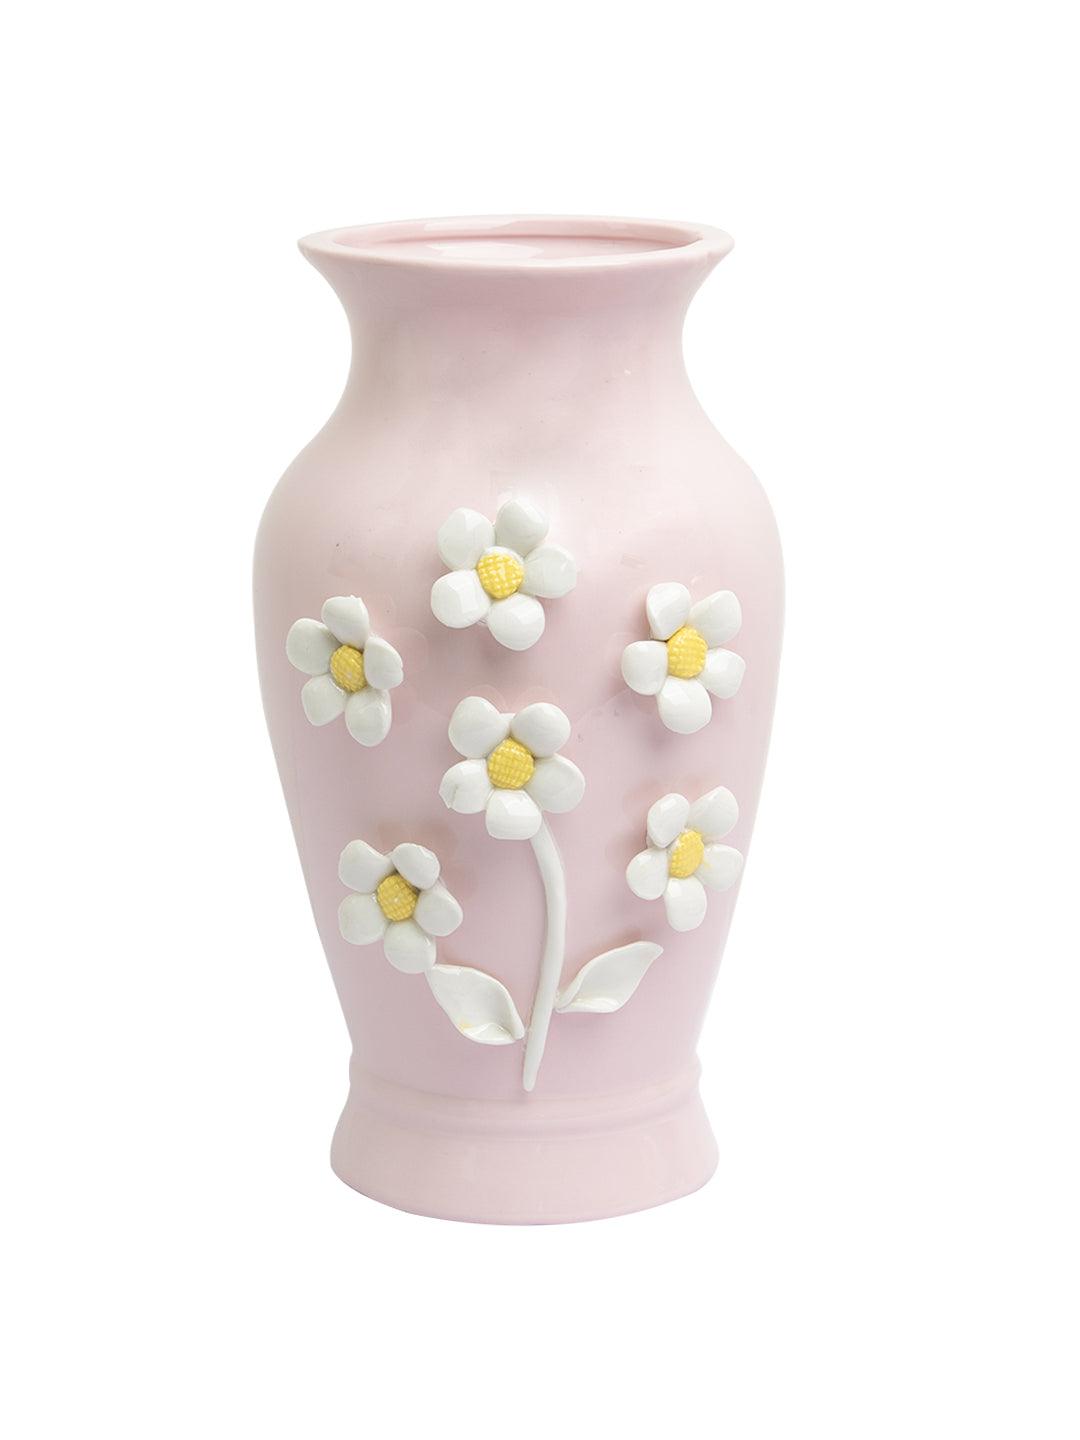 Pear Shape Pink Ceramic Vase with Lily Flowers - MARKET 99